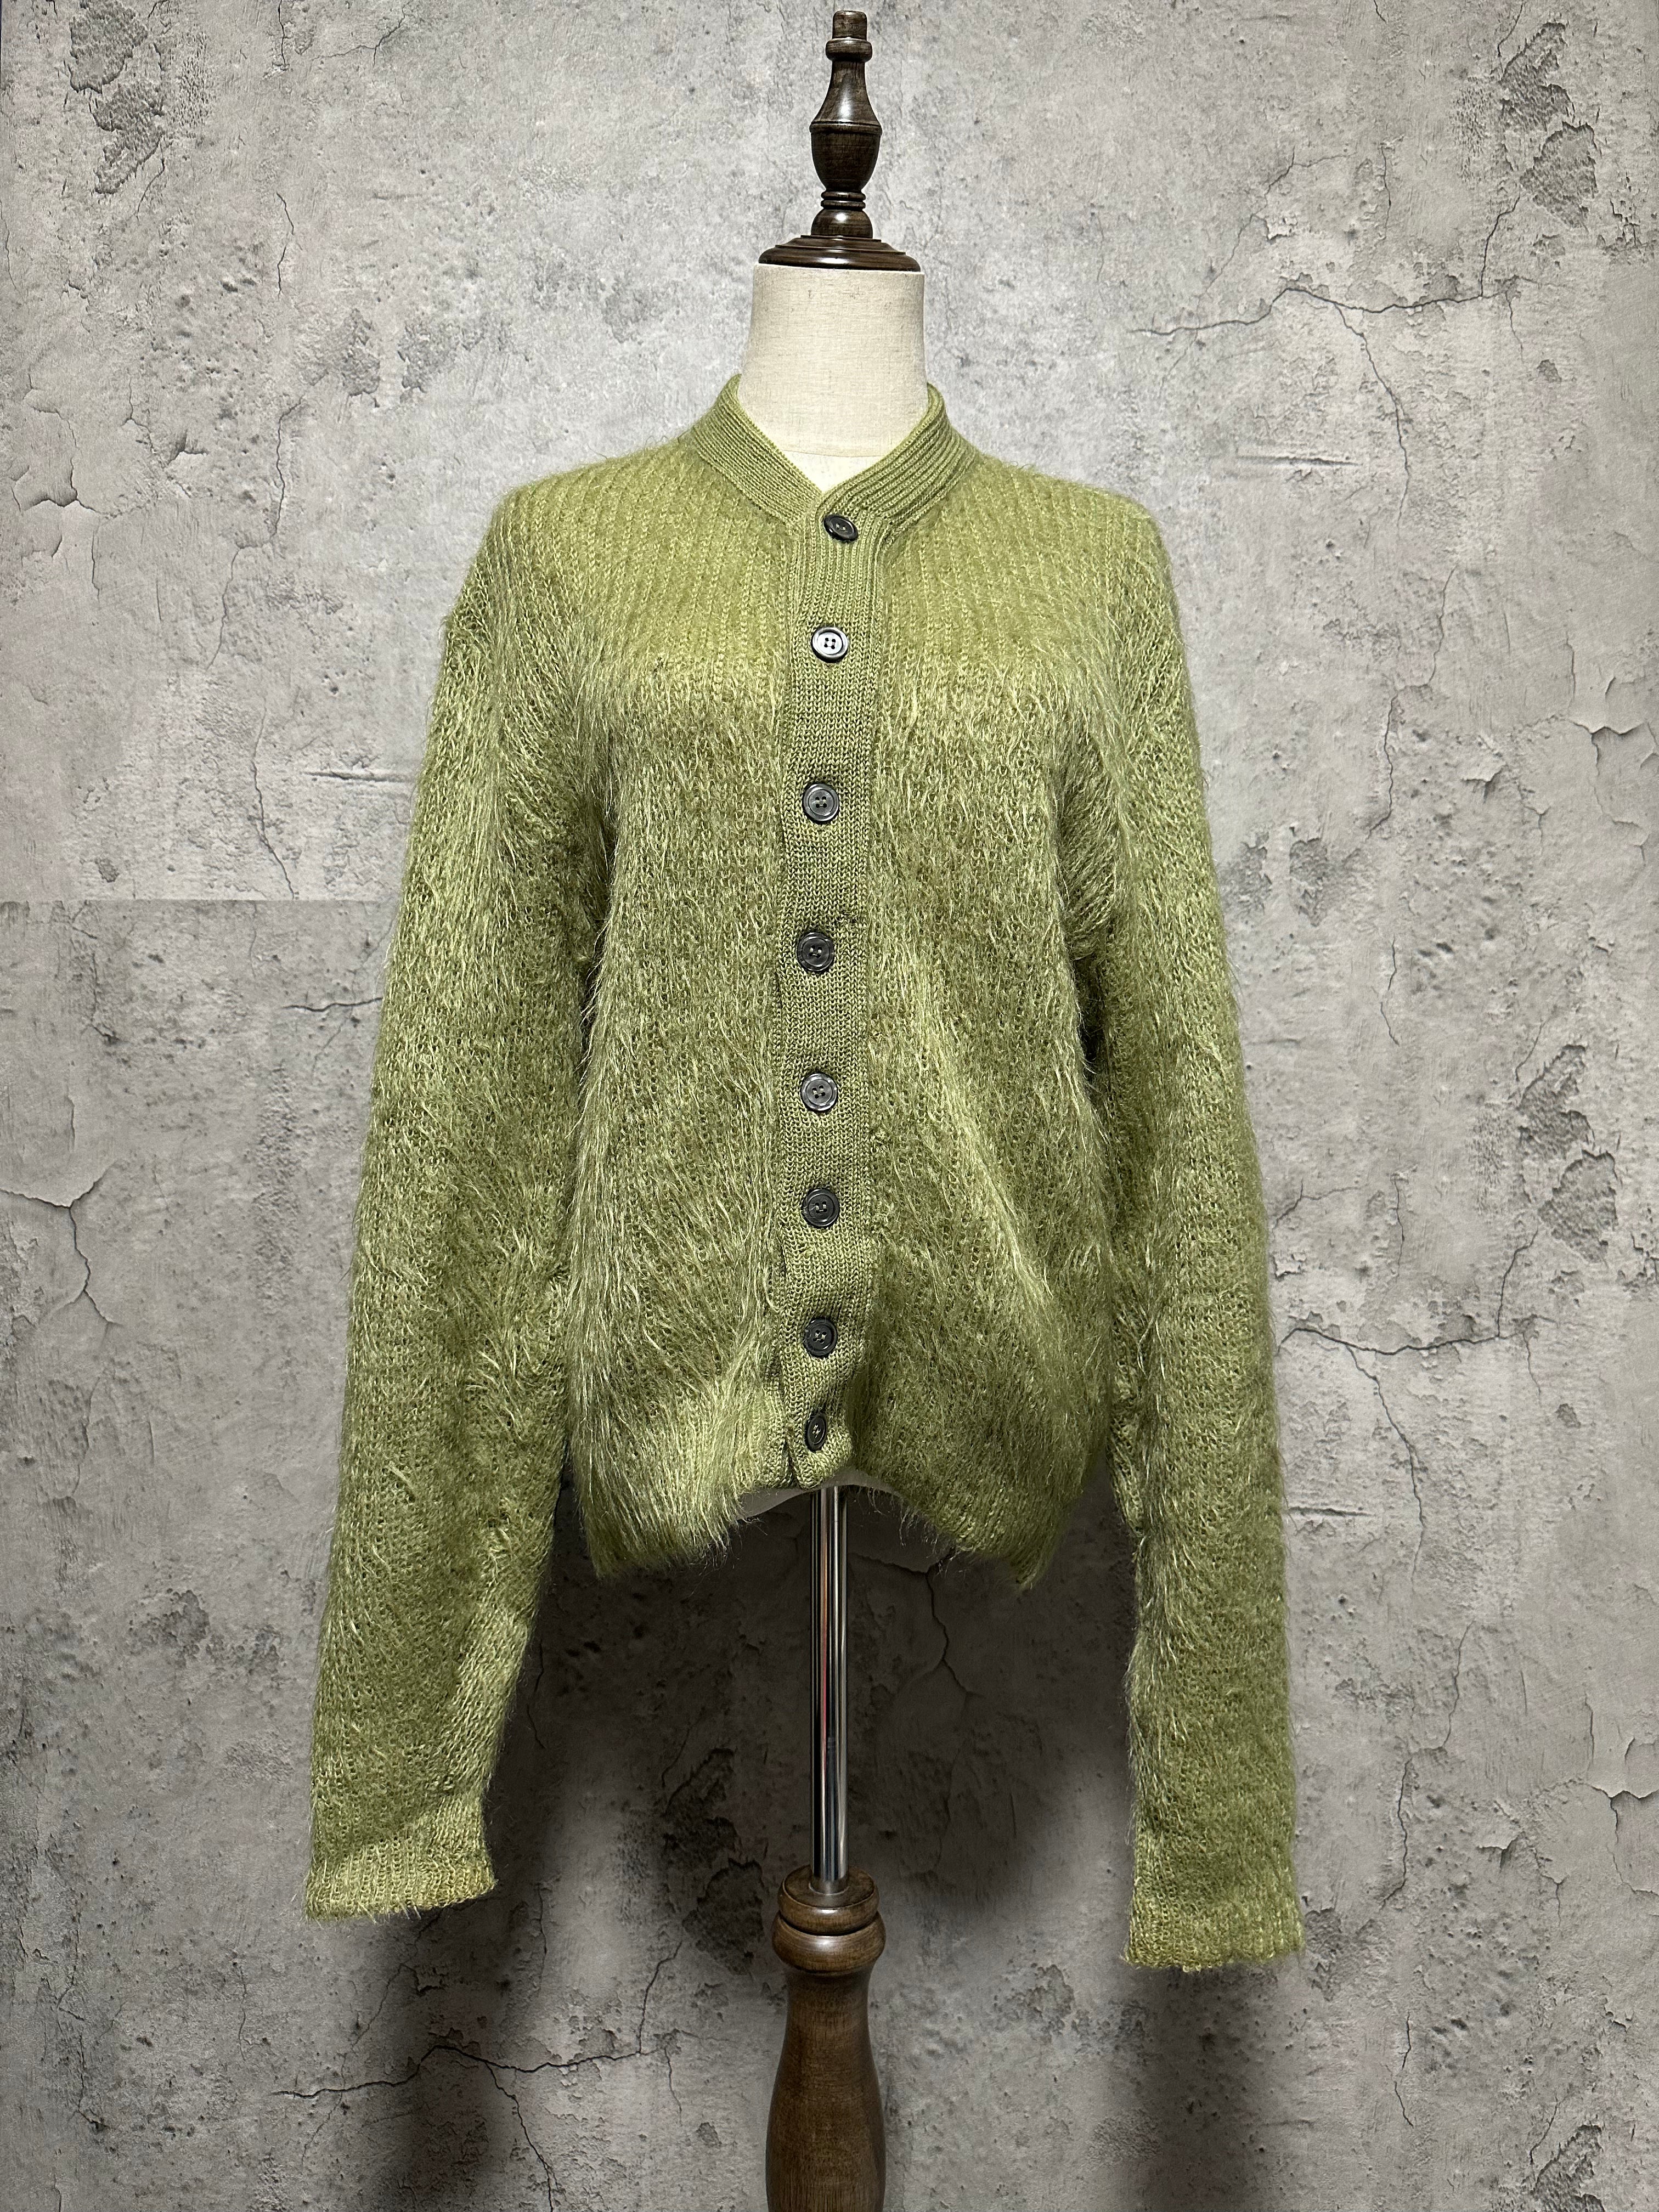 Sears Premiere COLLECTION mohair cardigan vintage 60s